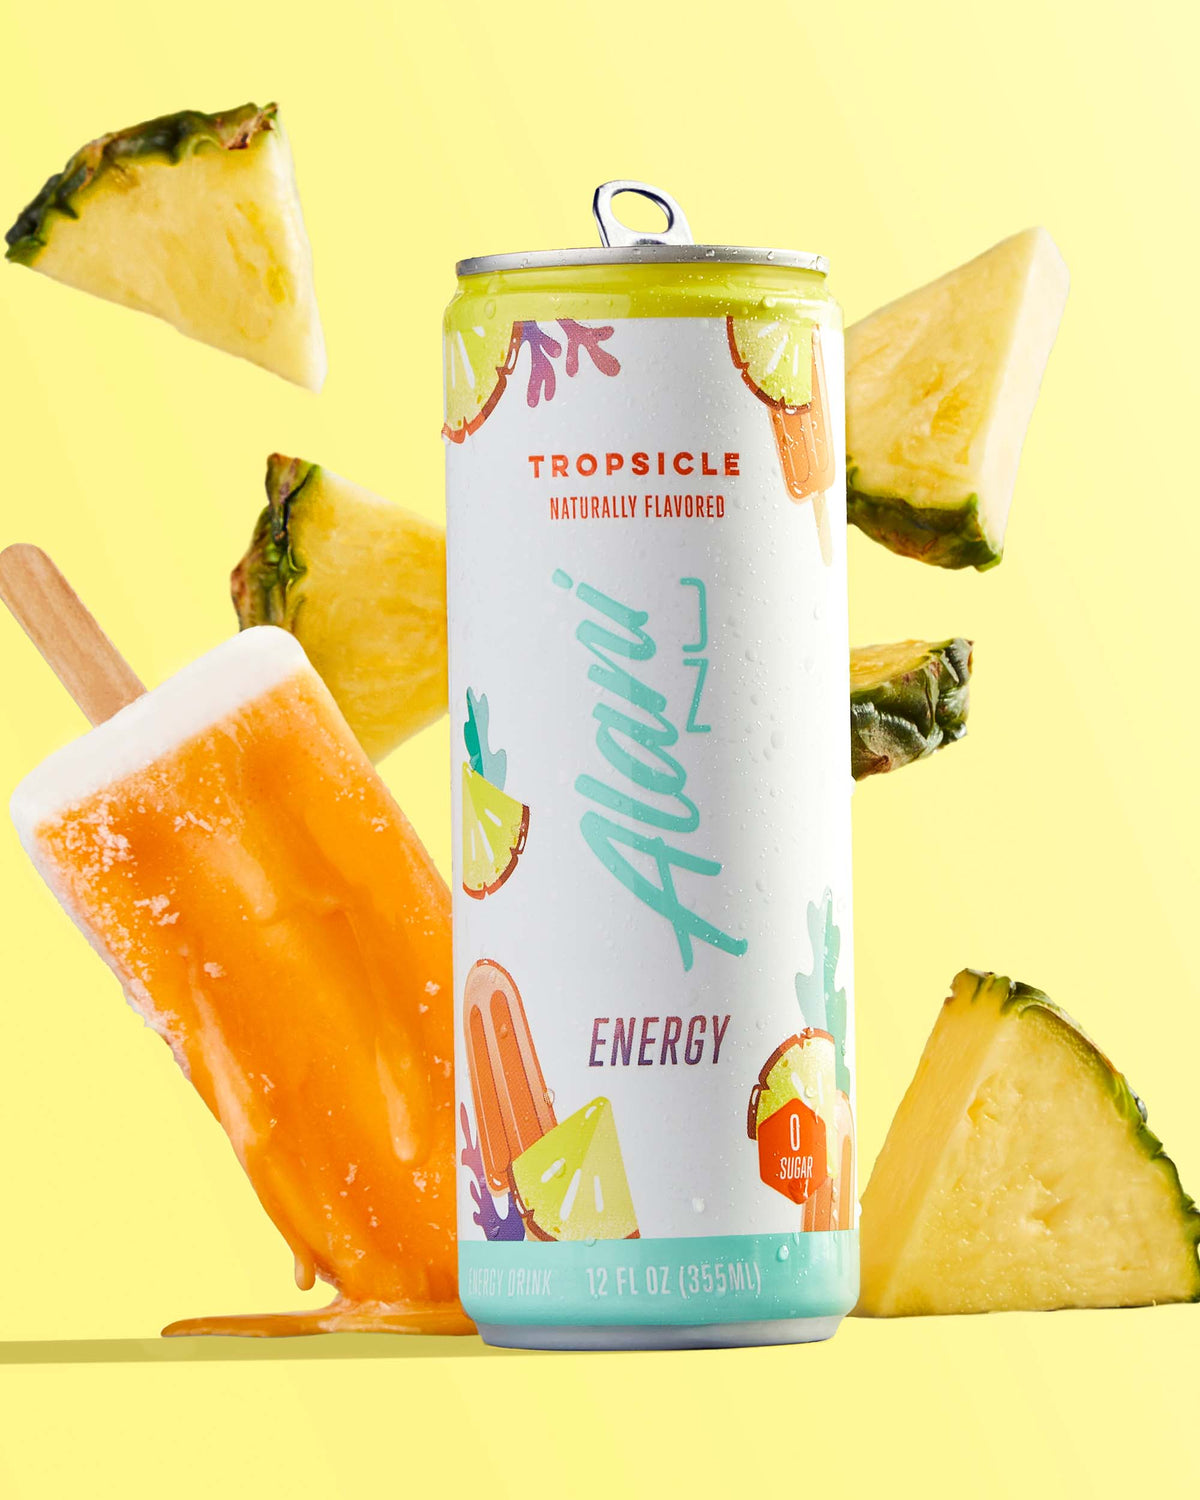 A 12 fl oz energy drink in Tropsicle flavor next to a popsicle and pineapples.